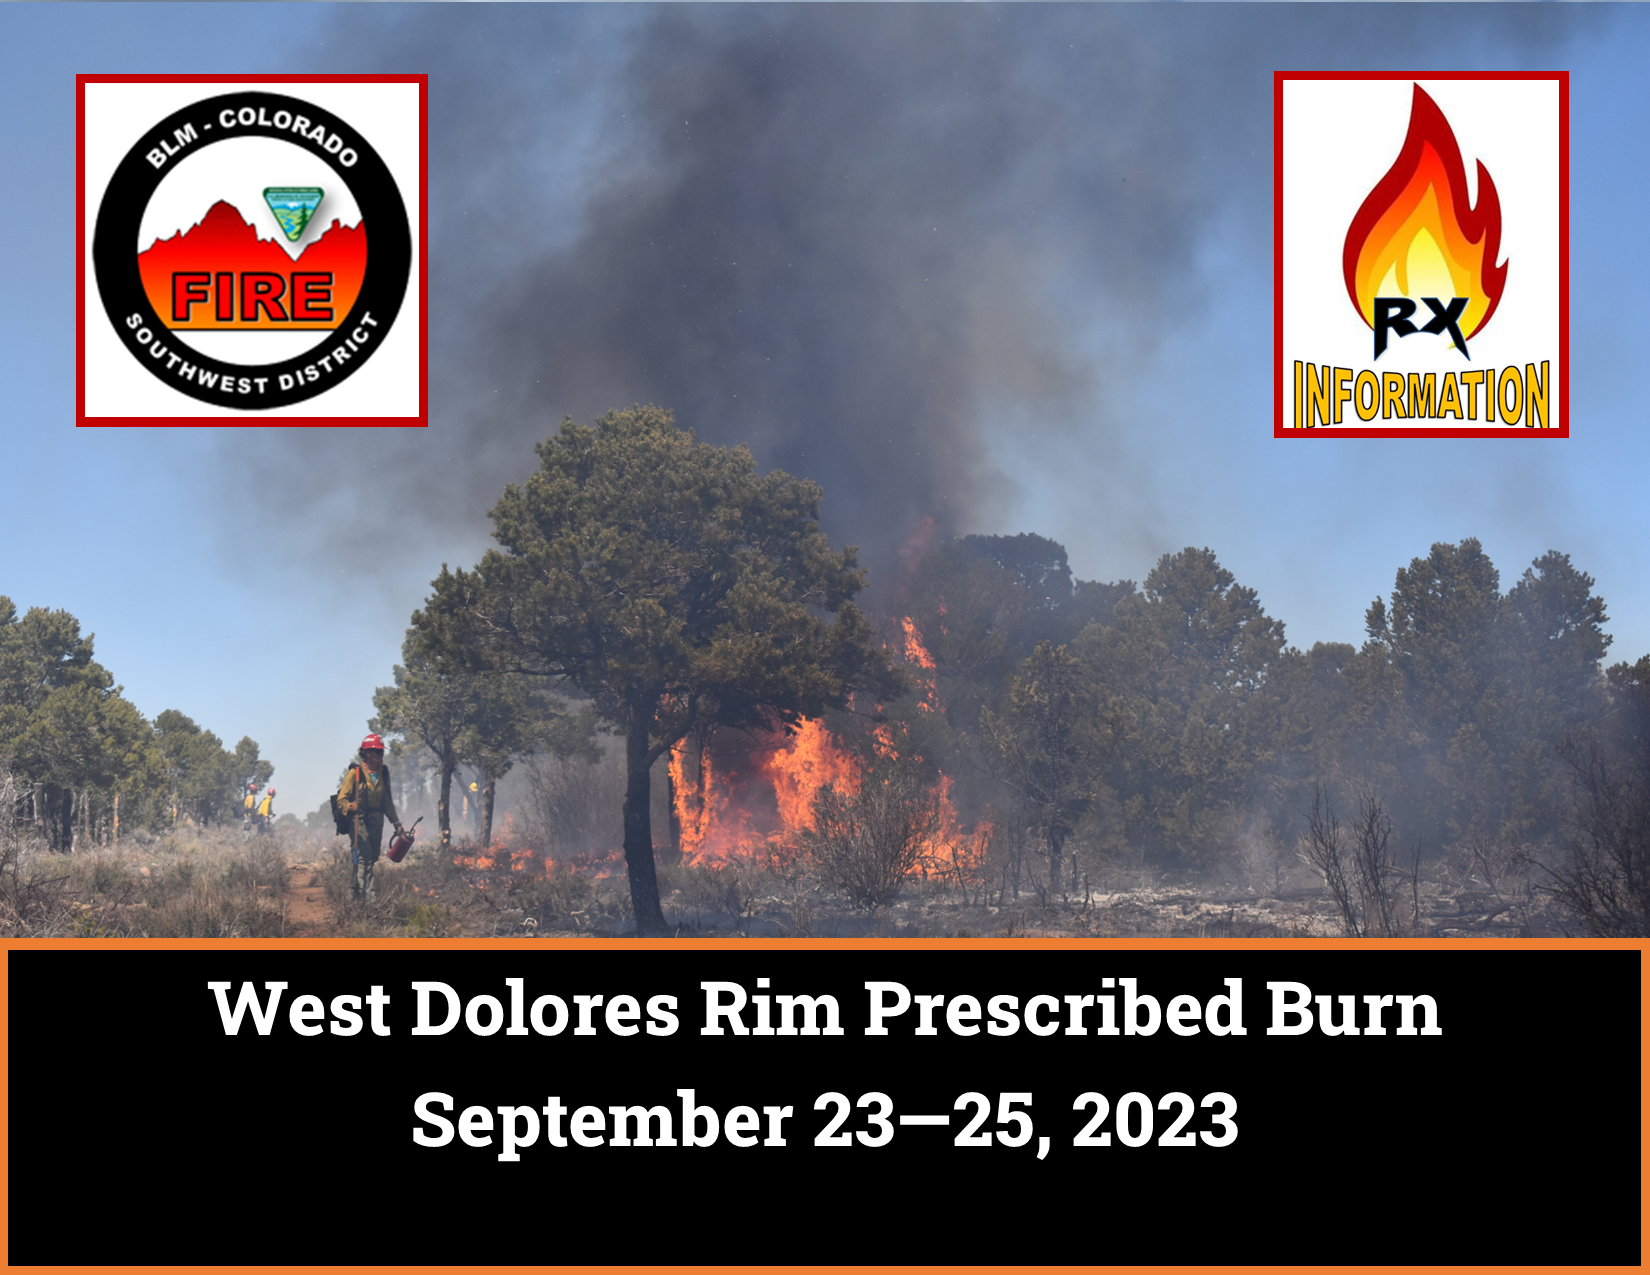 Image of firefighters, pinyon pine burning with flames and smoke. Text BLM Colorado Southwest District, RX Information, West Dolores Rim Prescribed Burn September 230-025, 2023